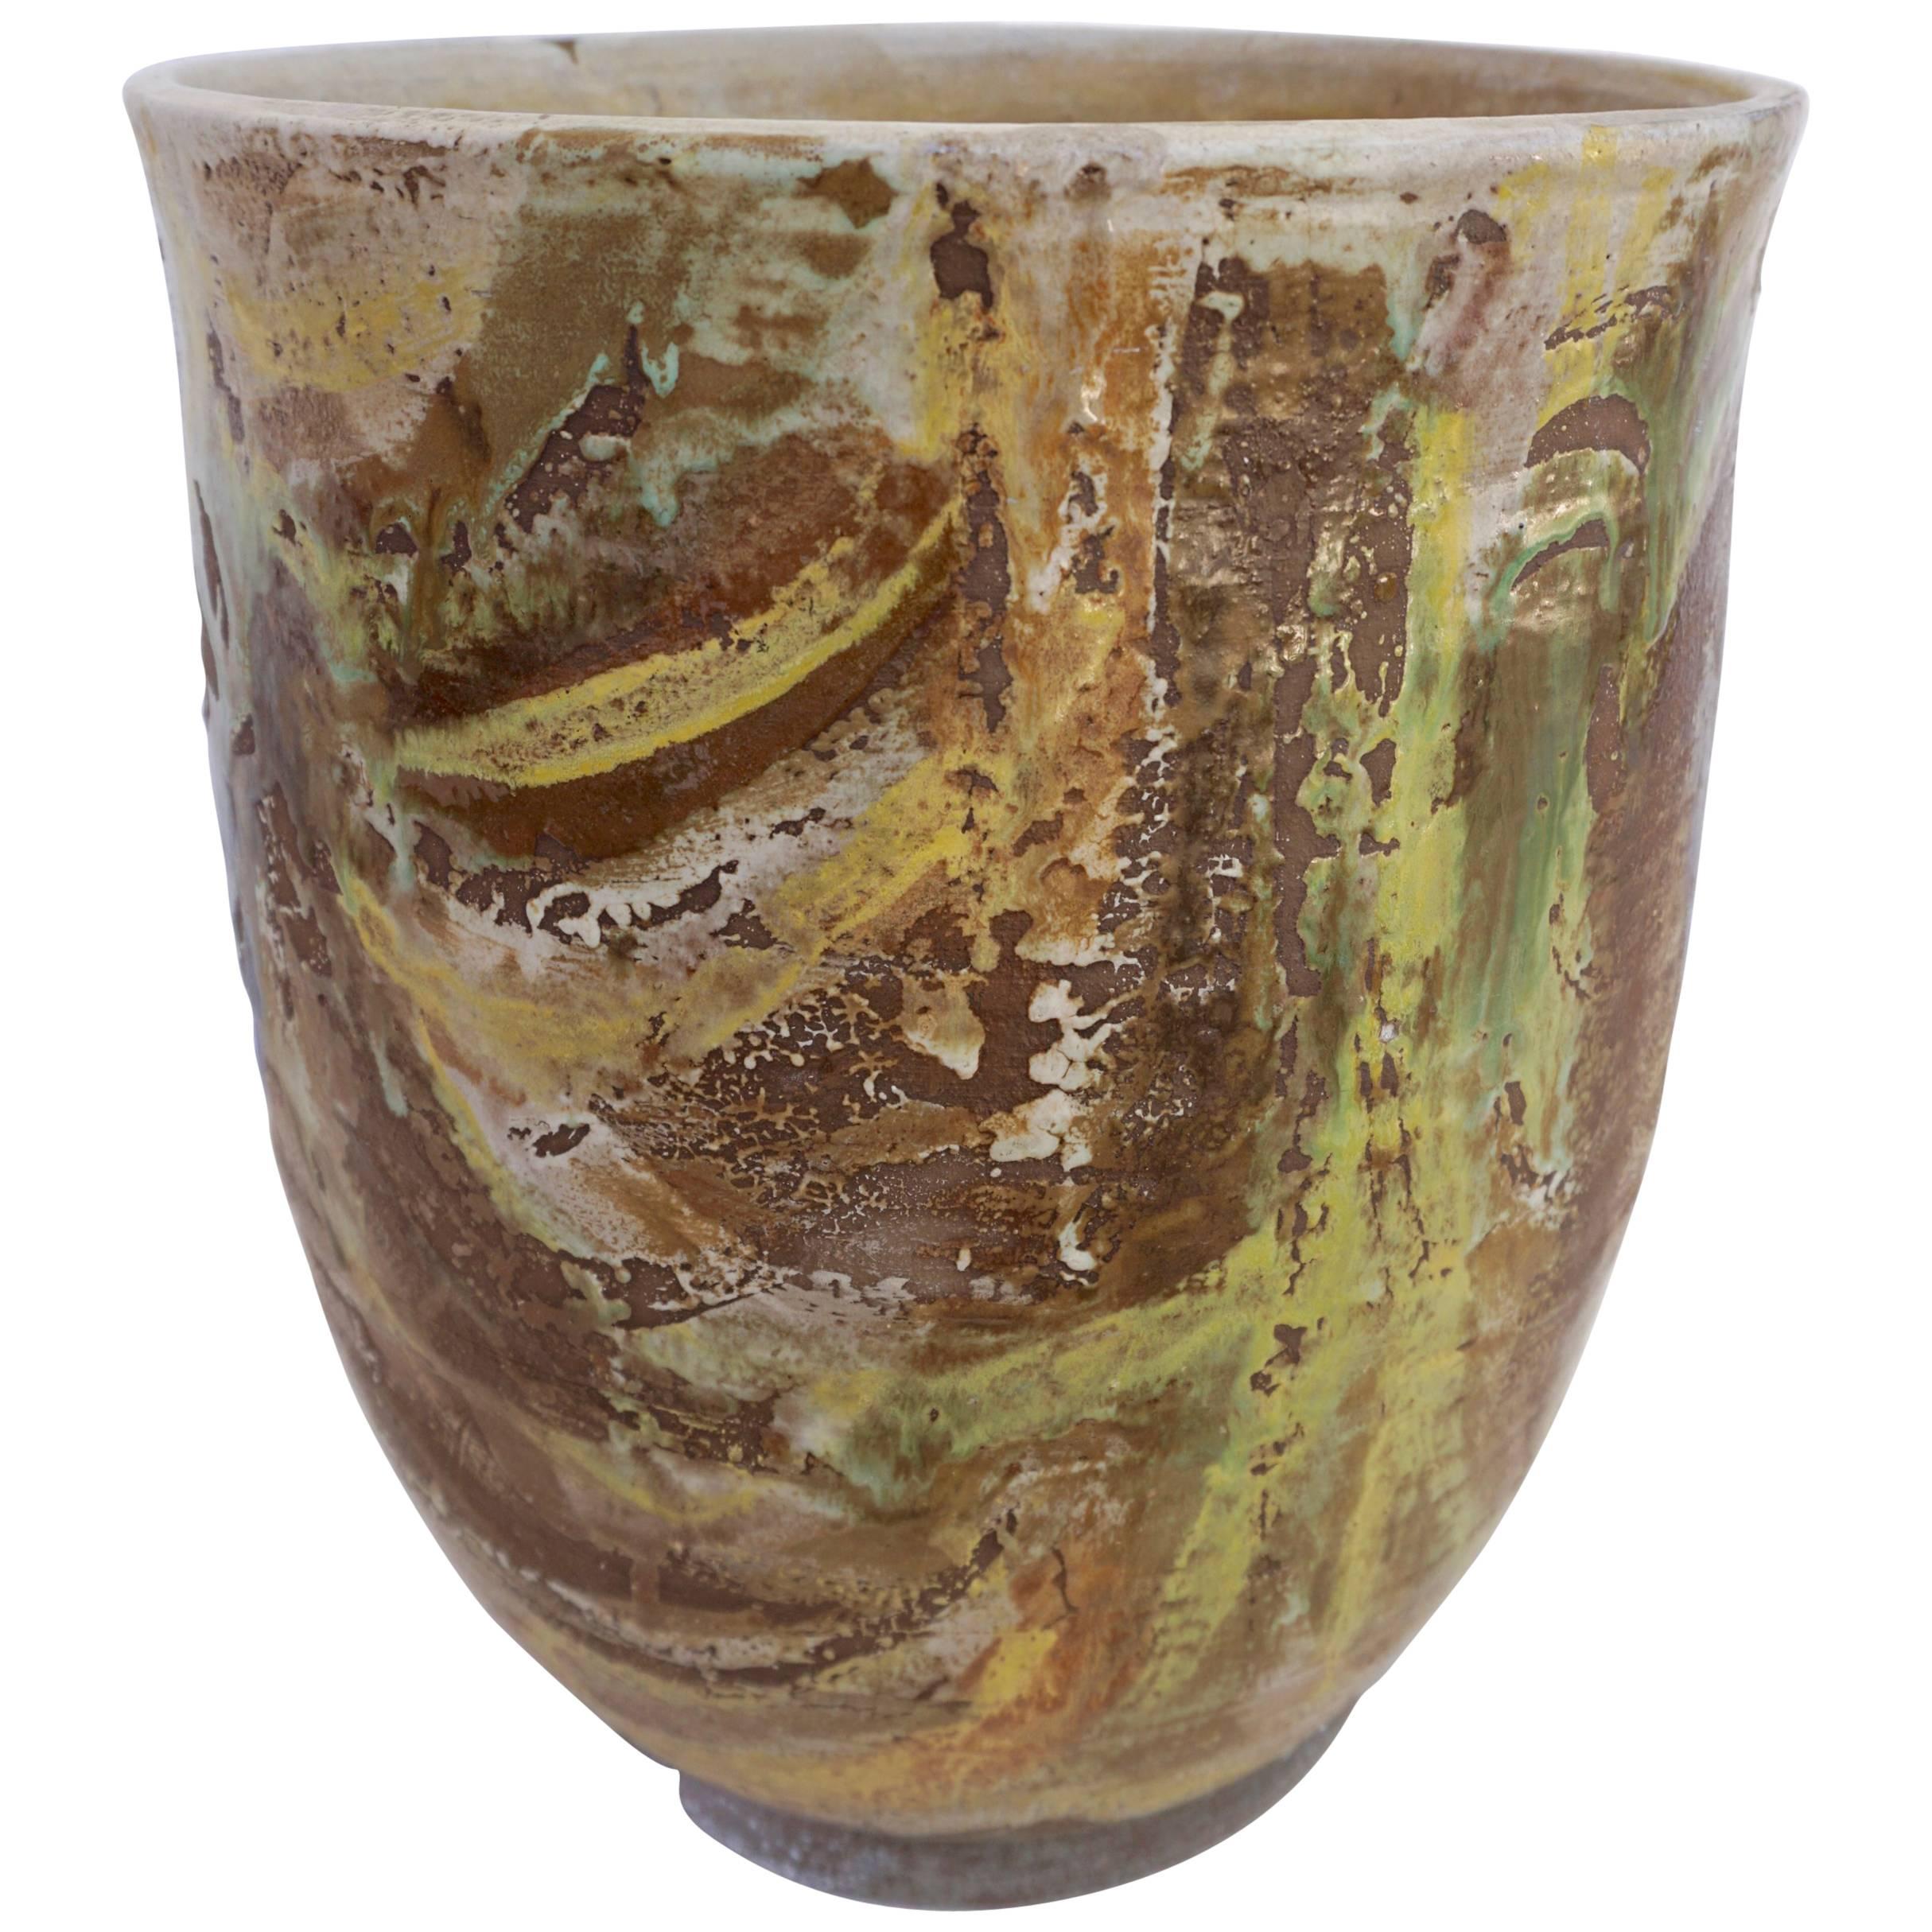 Abstract Glazed Ceramic Vessel by Stan Bitters